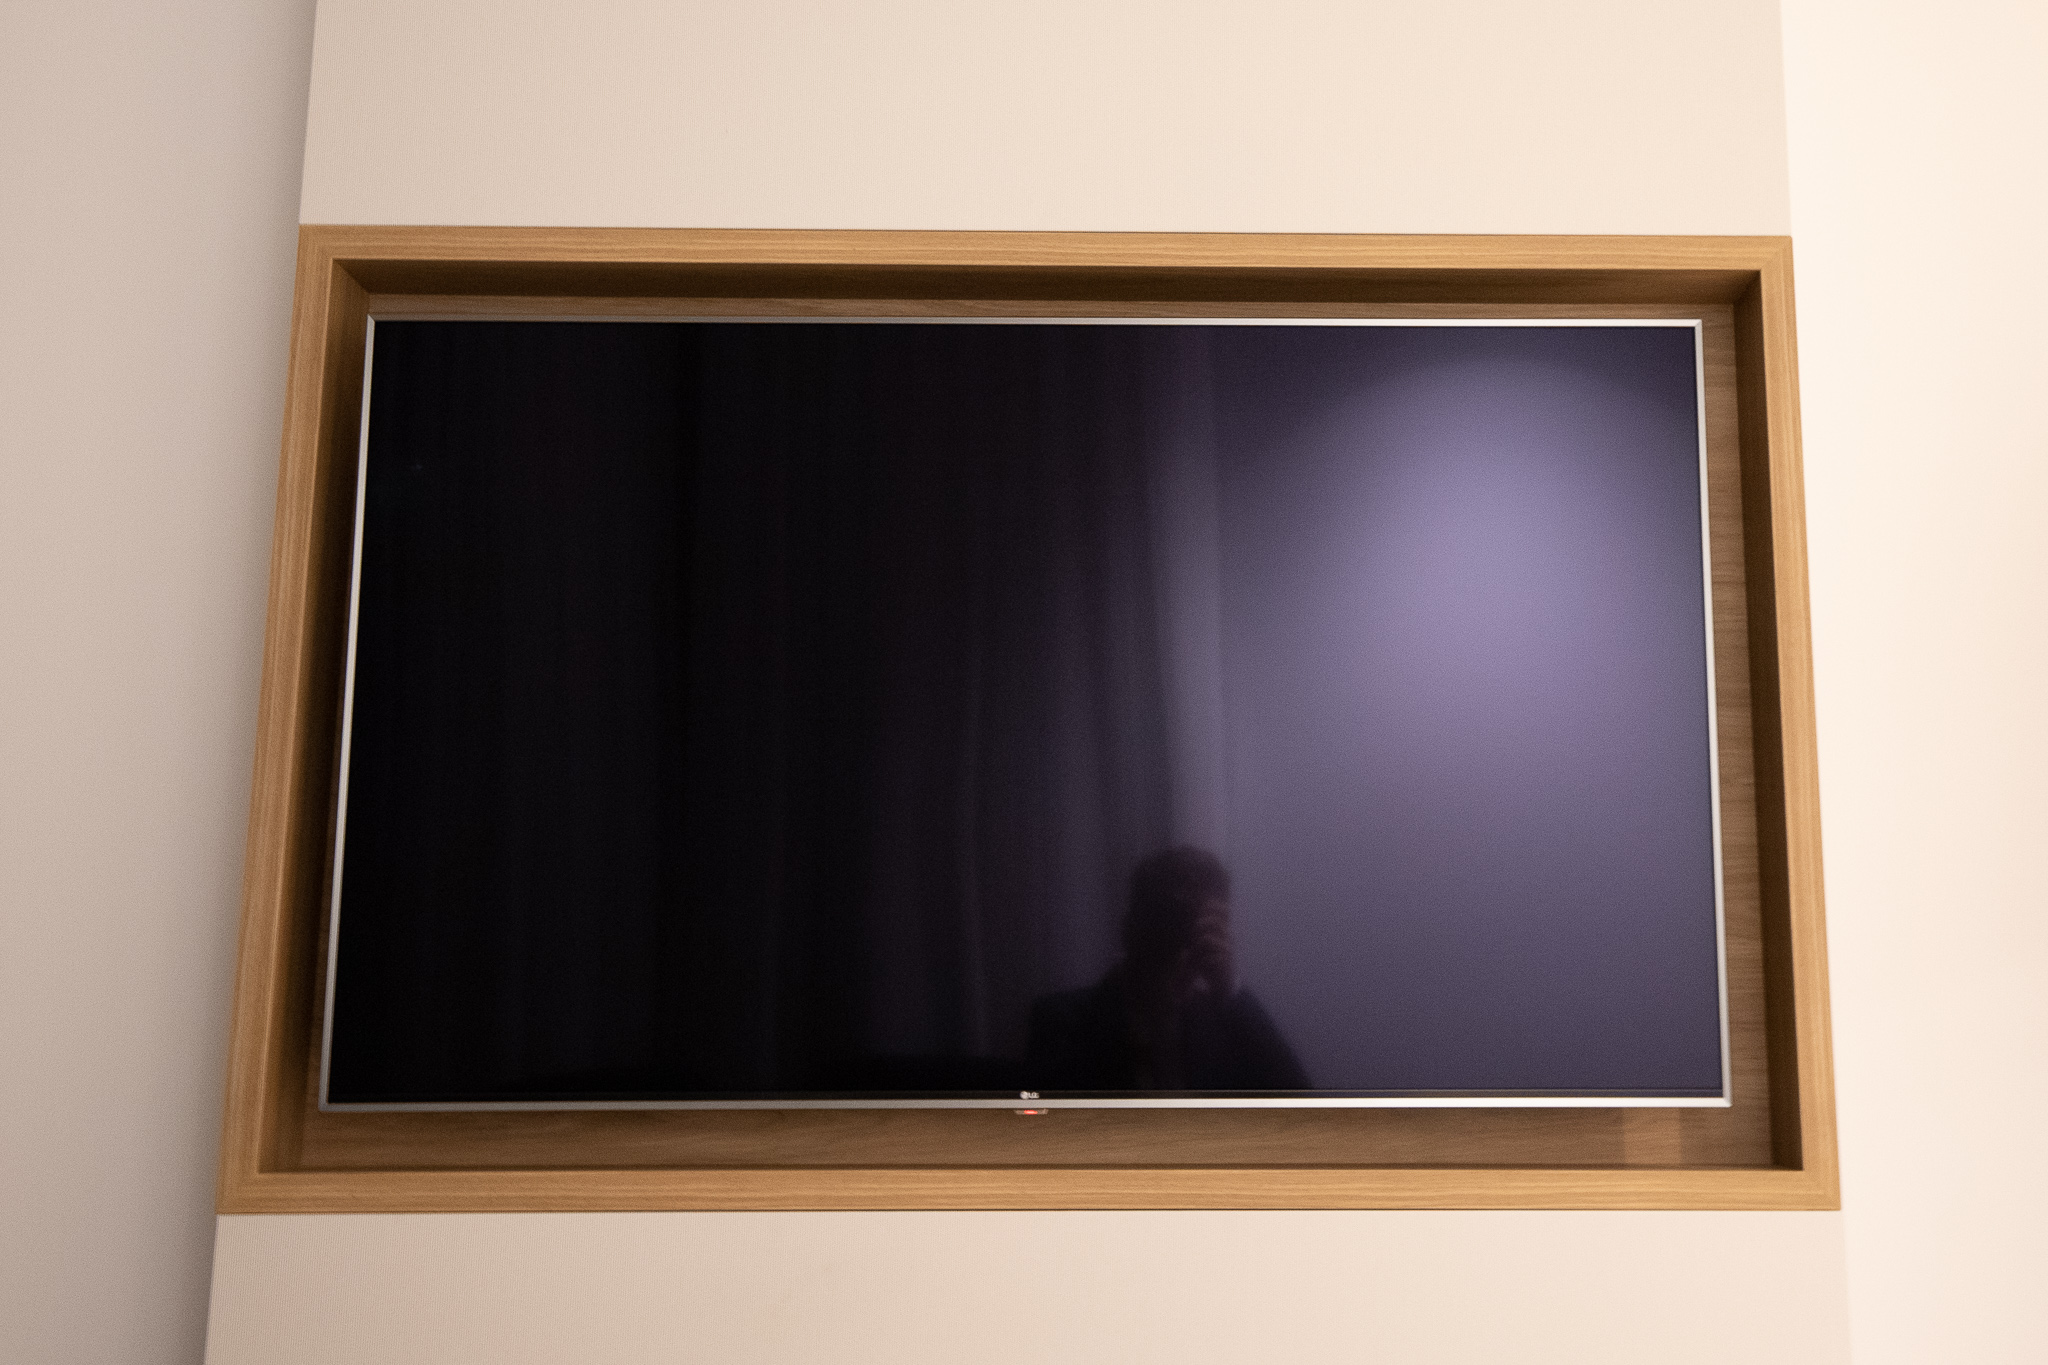 a rectangular wooden frame with a person's reflection in it